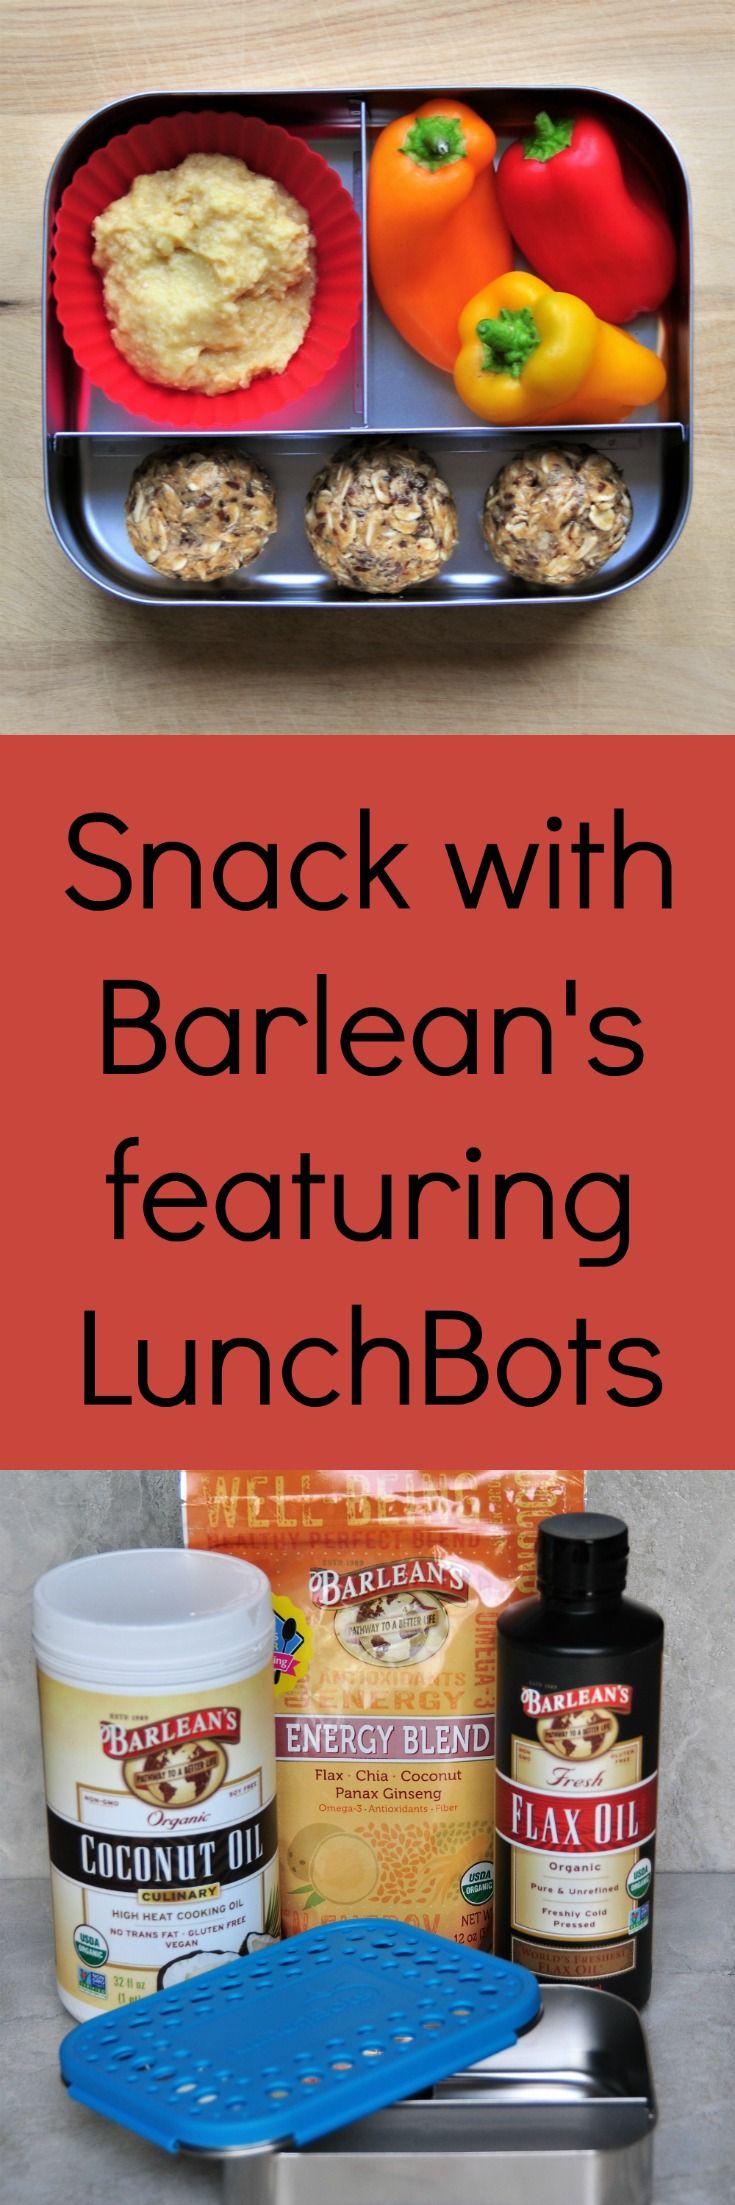 Snack with Barlean's featuring LunchBots